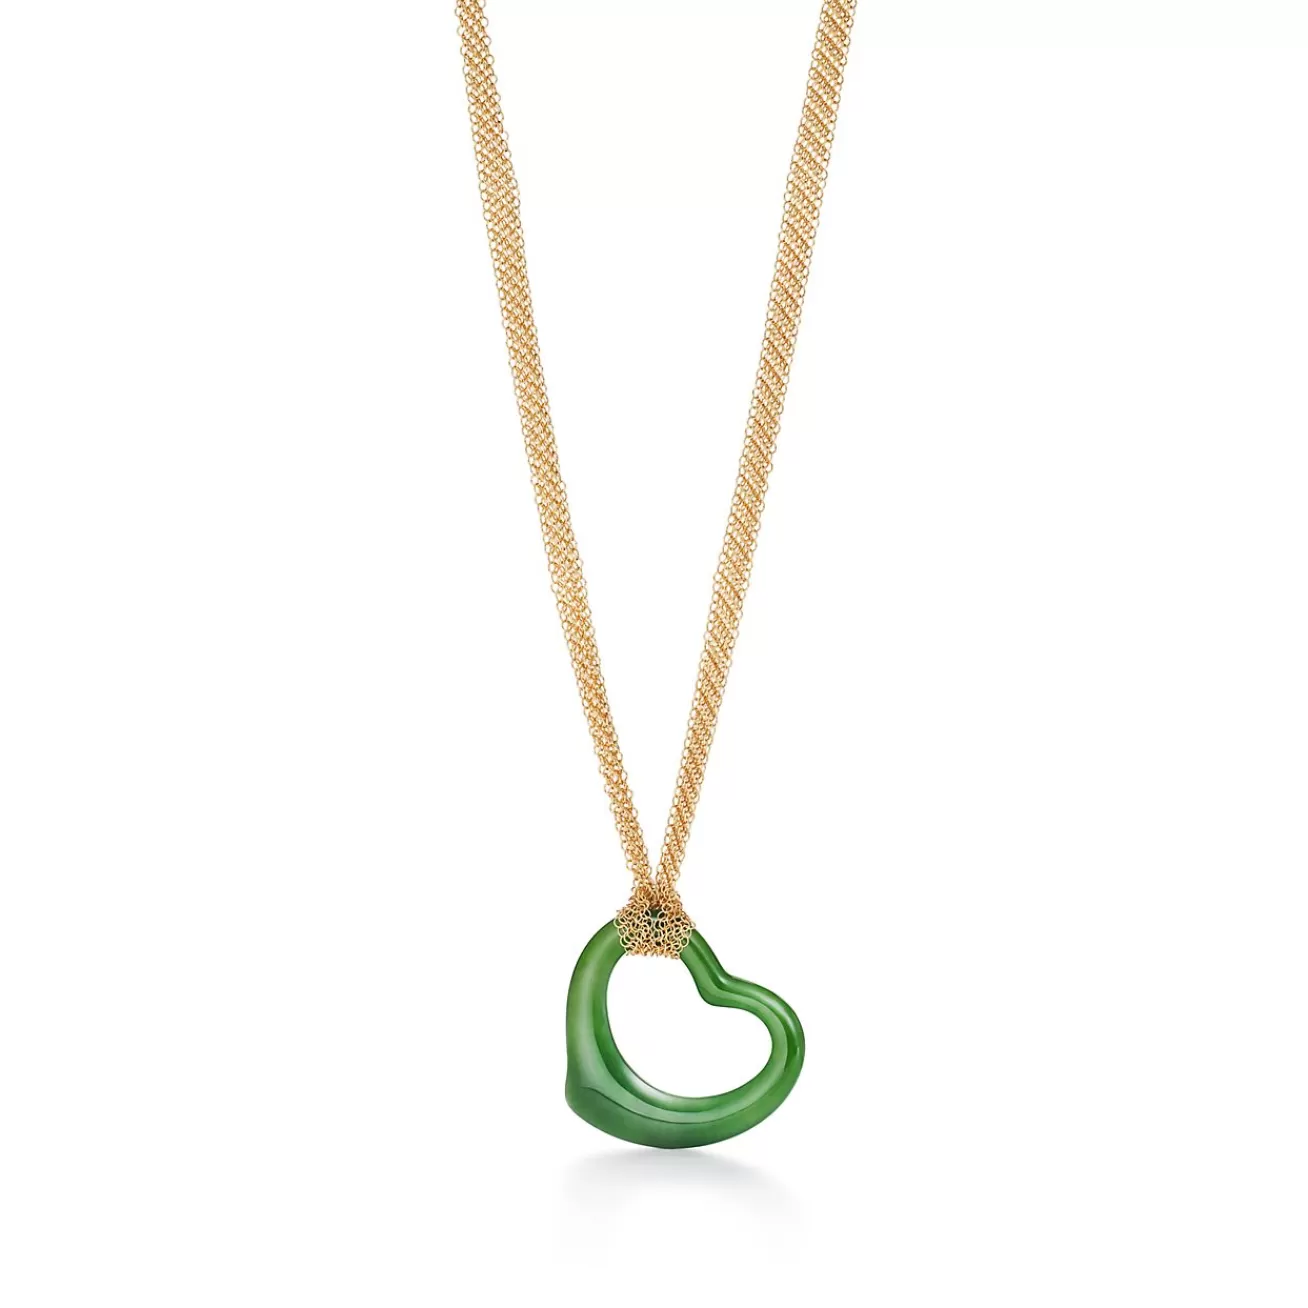 Tiffany & Co. Elsa Peretti® Open Heart pendant of green jade and 18k gold. | ^ Necklaces & Pendants | Gold Jewelry